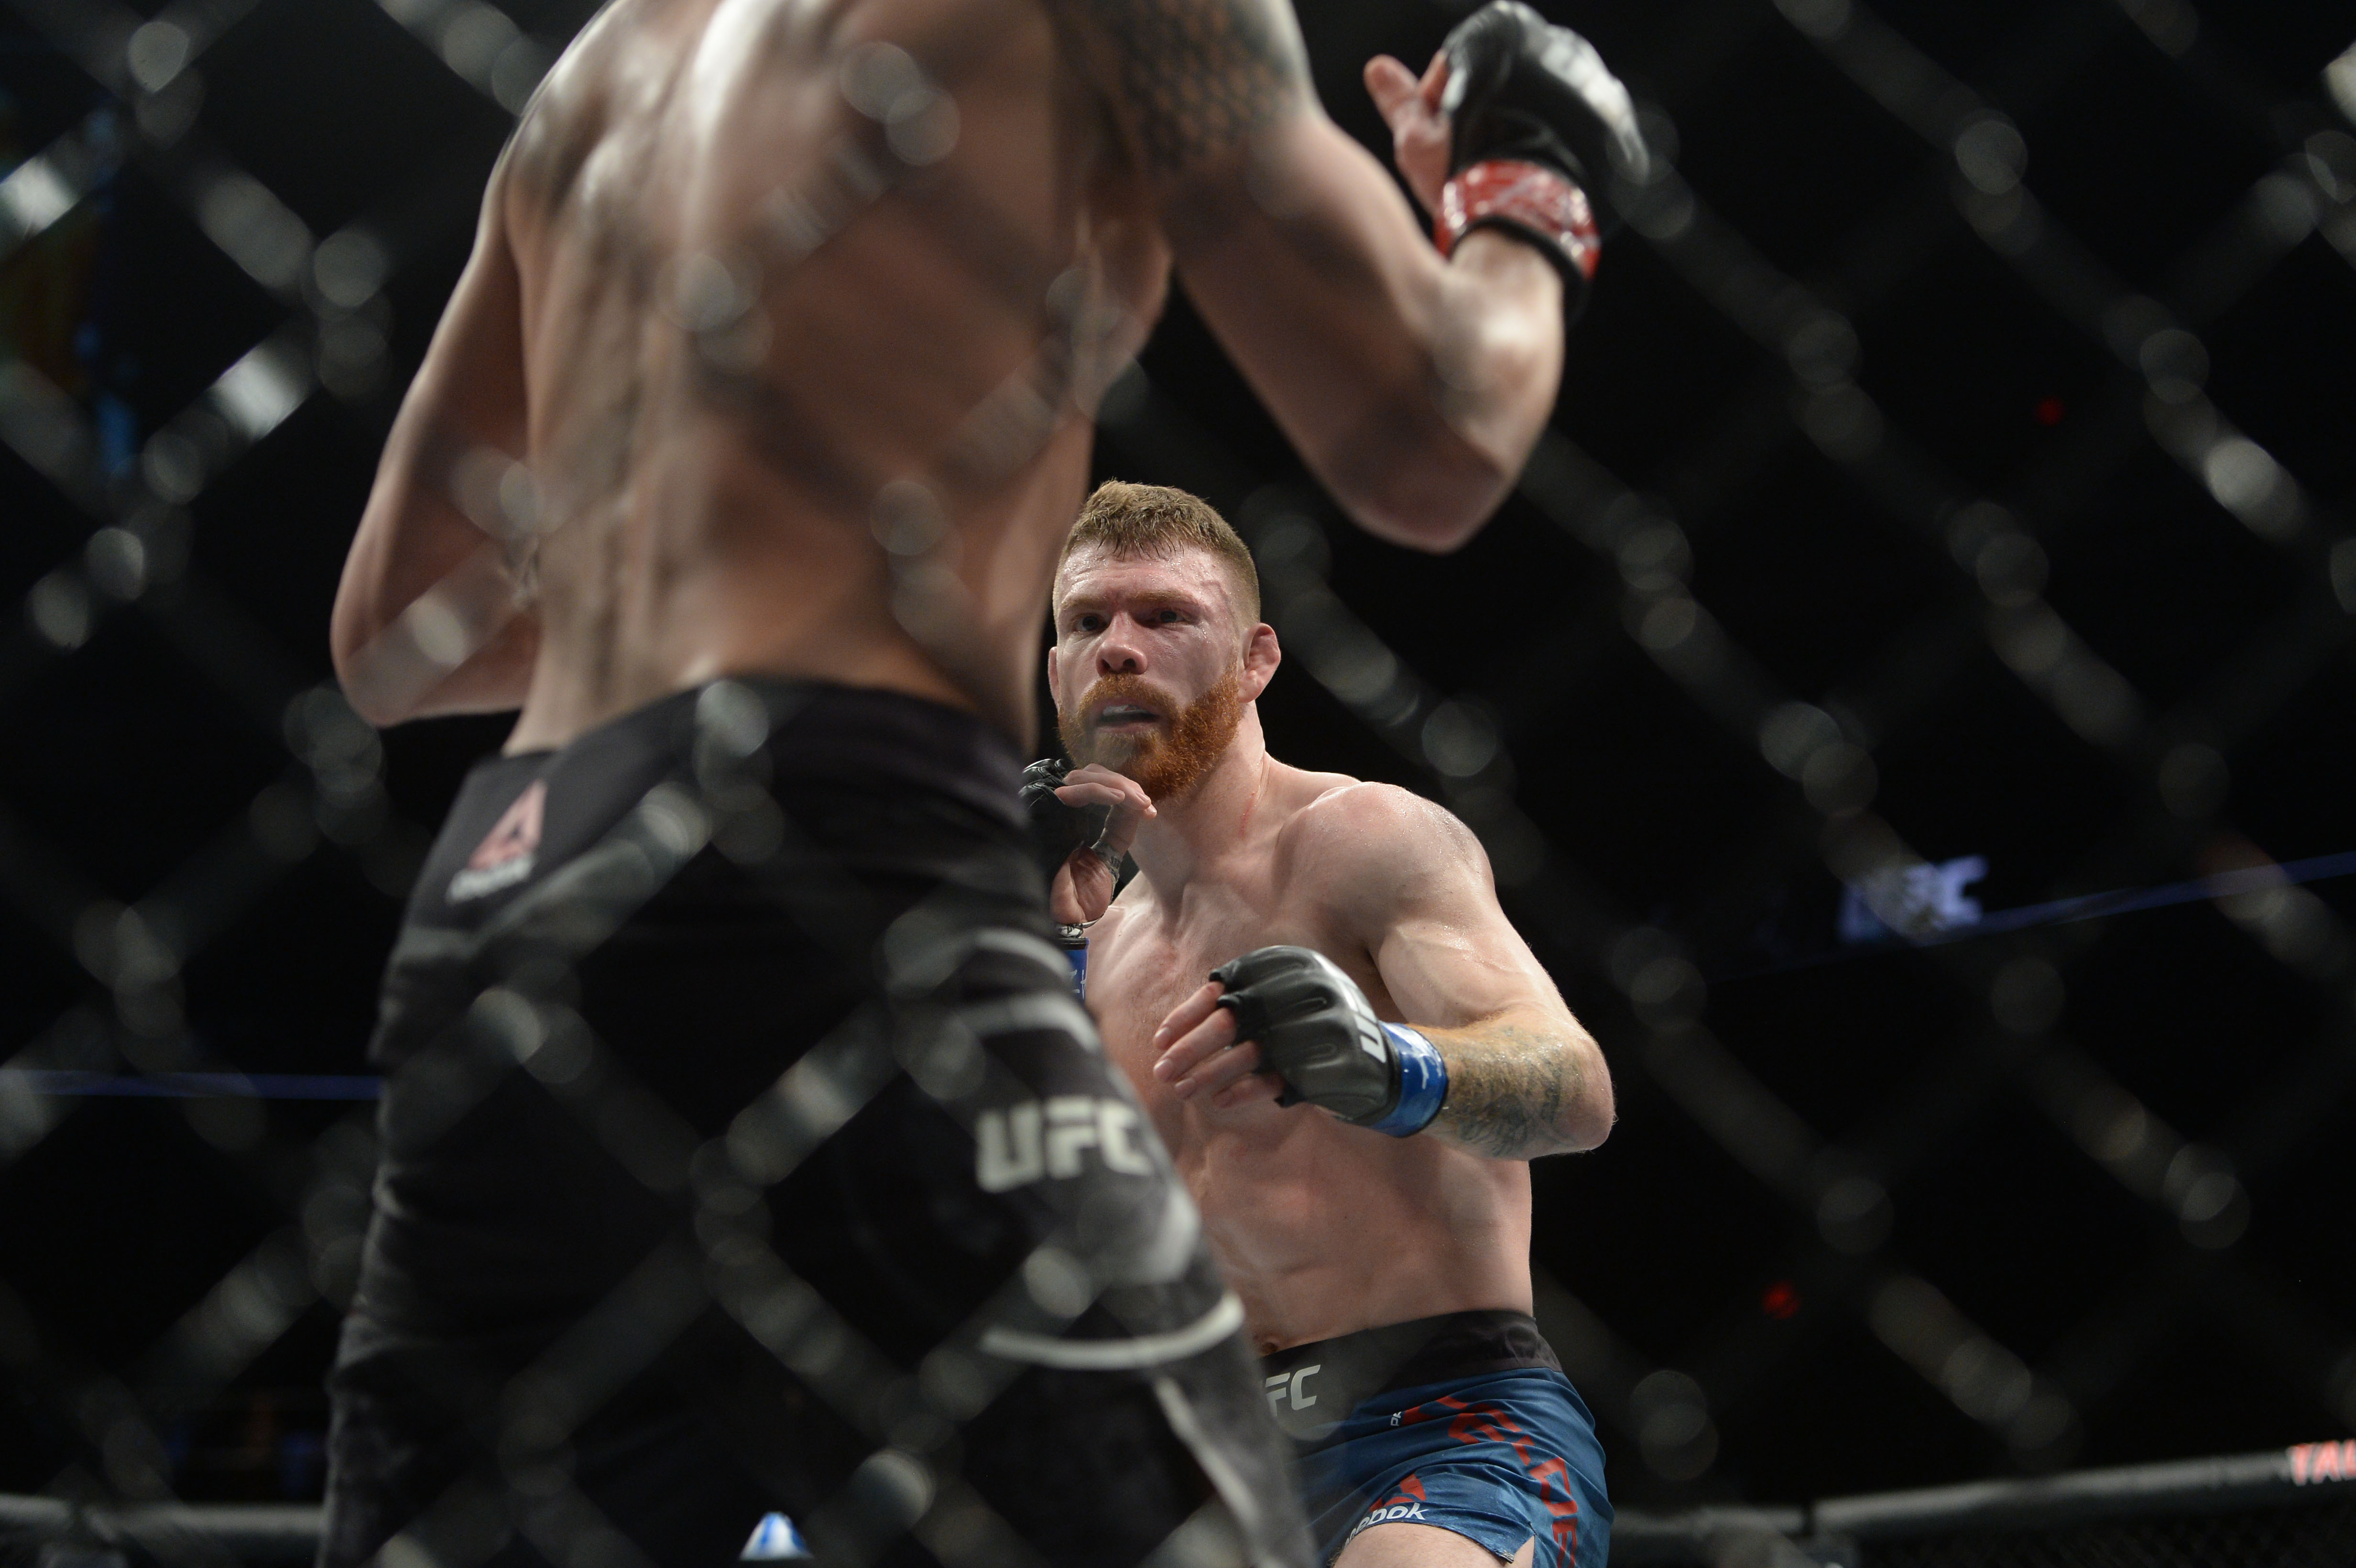 Philly Guy Paul Felder Suffered a Collapsed Lung, Still Won his UFC Fight